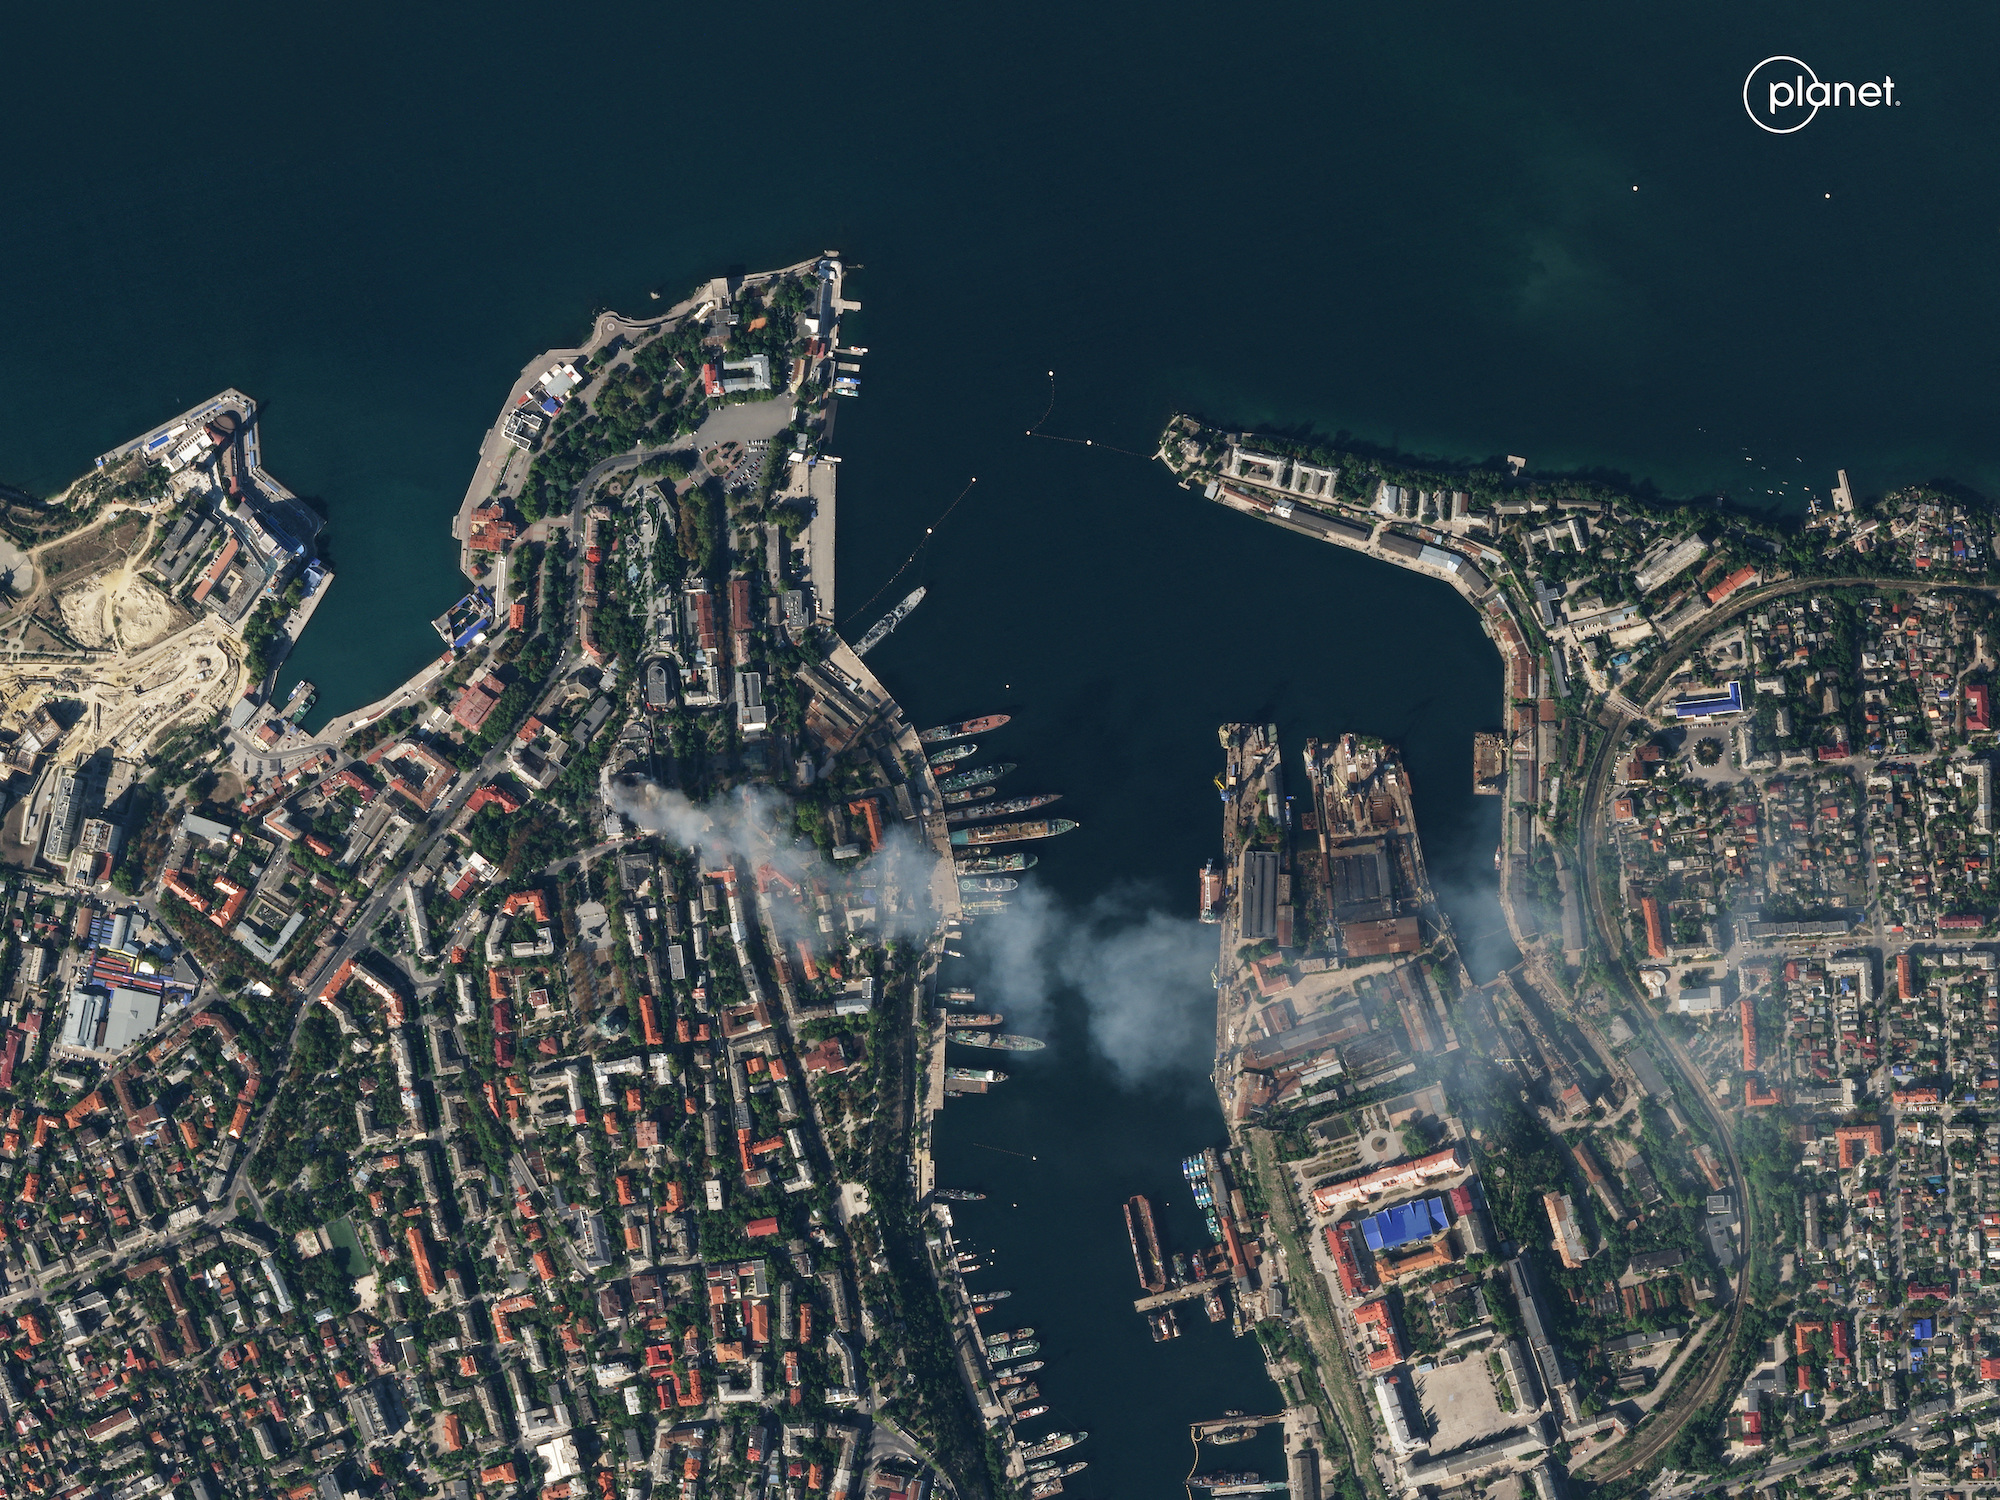 A satellite image shows smoke billowing from the Russian Black Sea Navy HQ after a missile strike in Sevastopol, Crimea, on Friday.